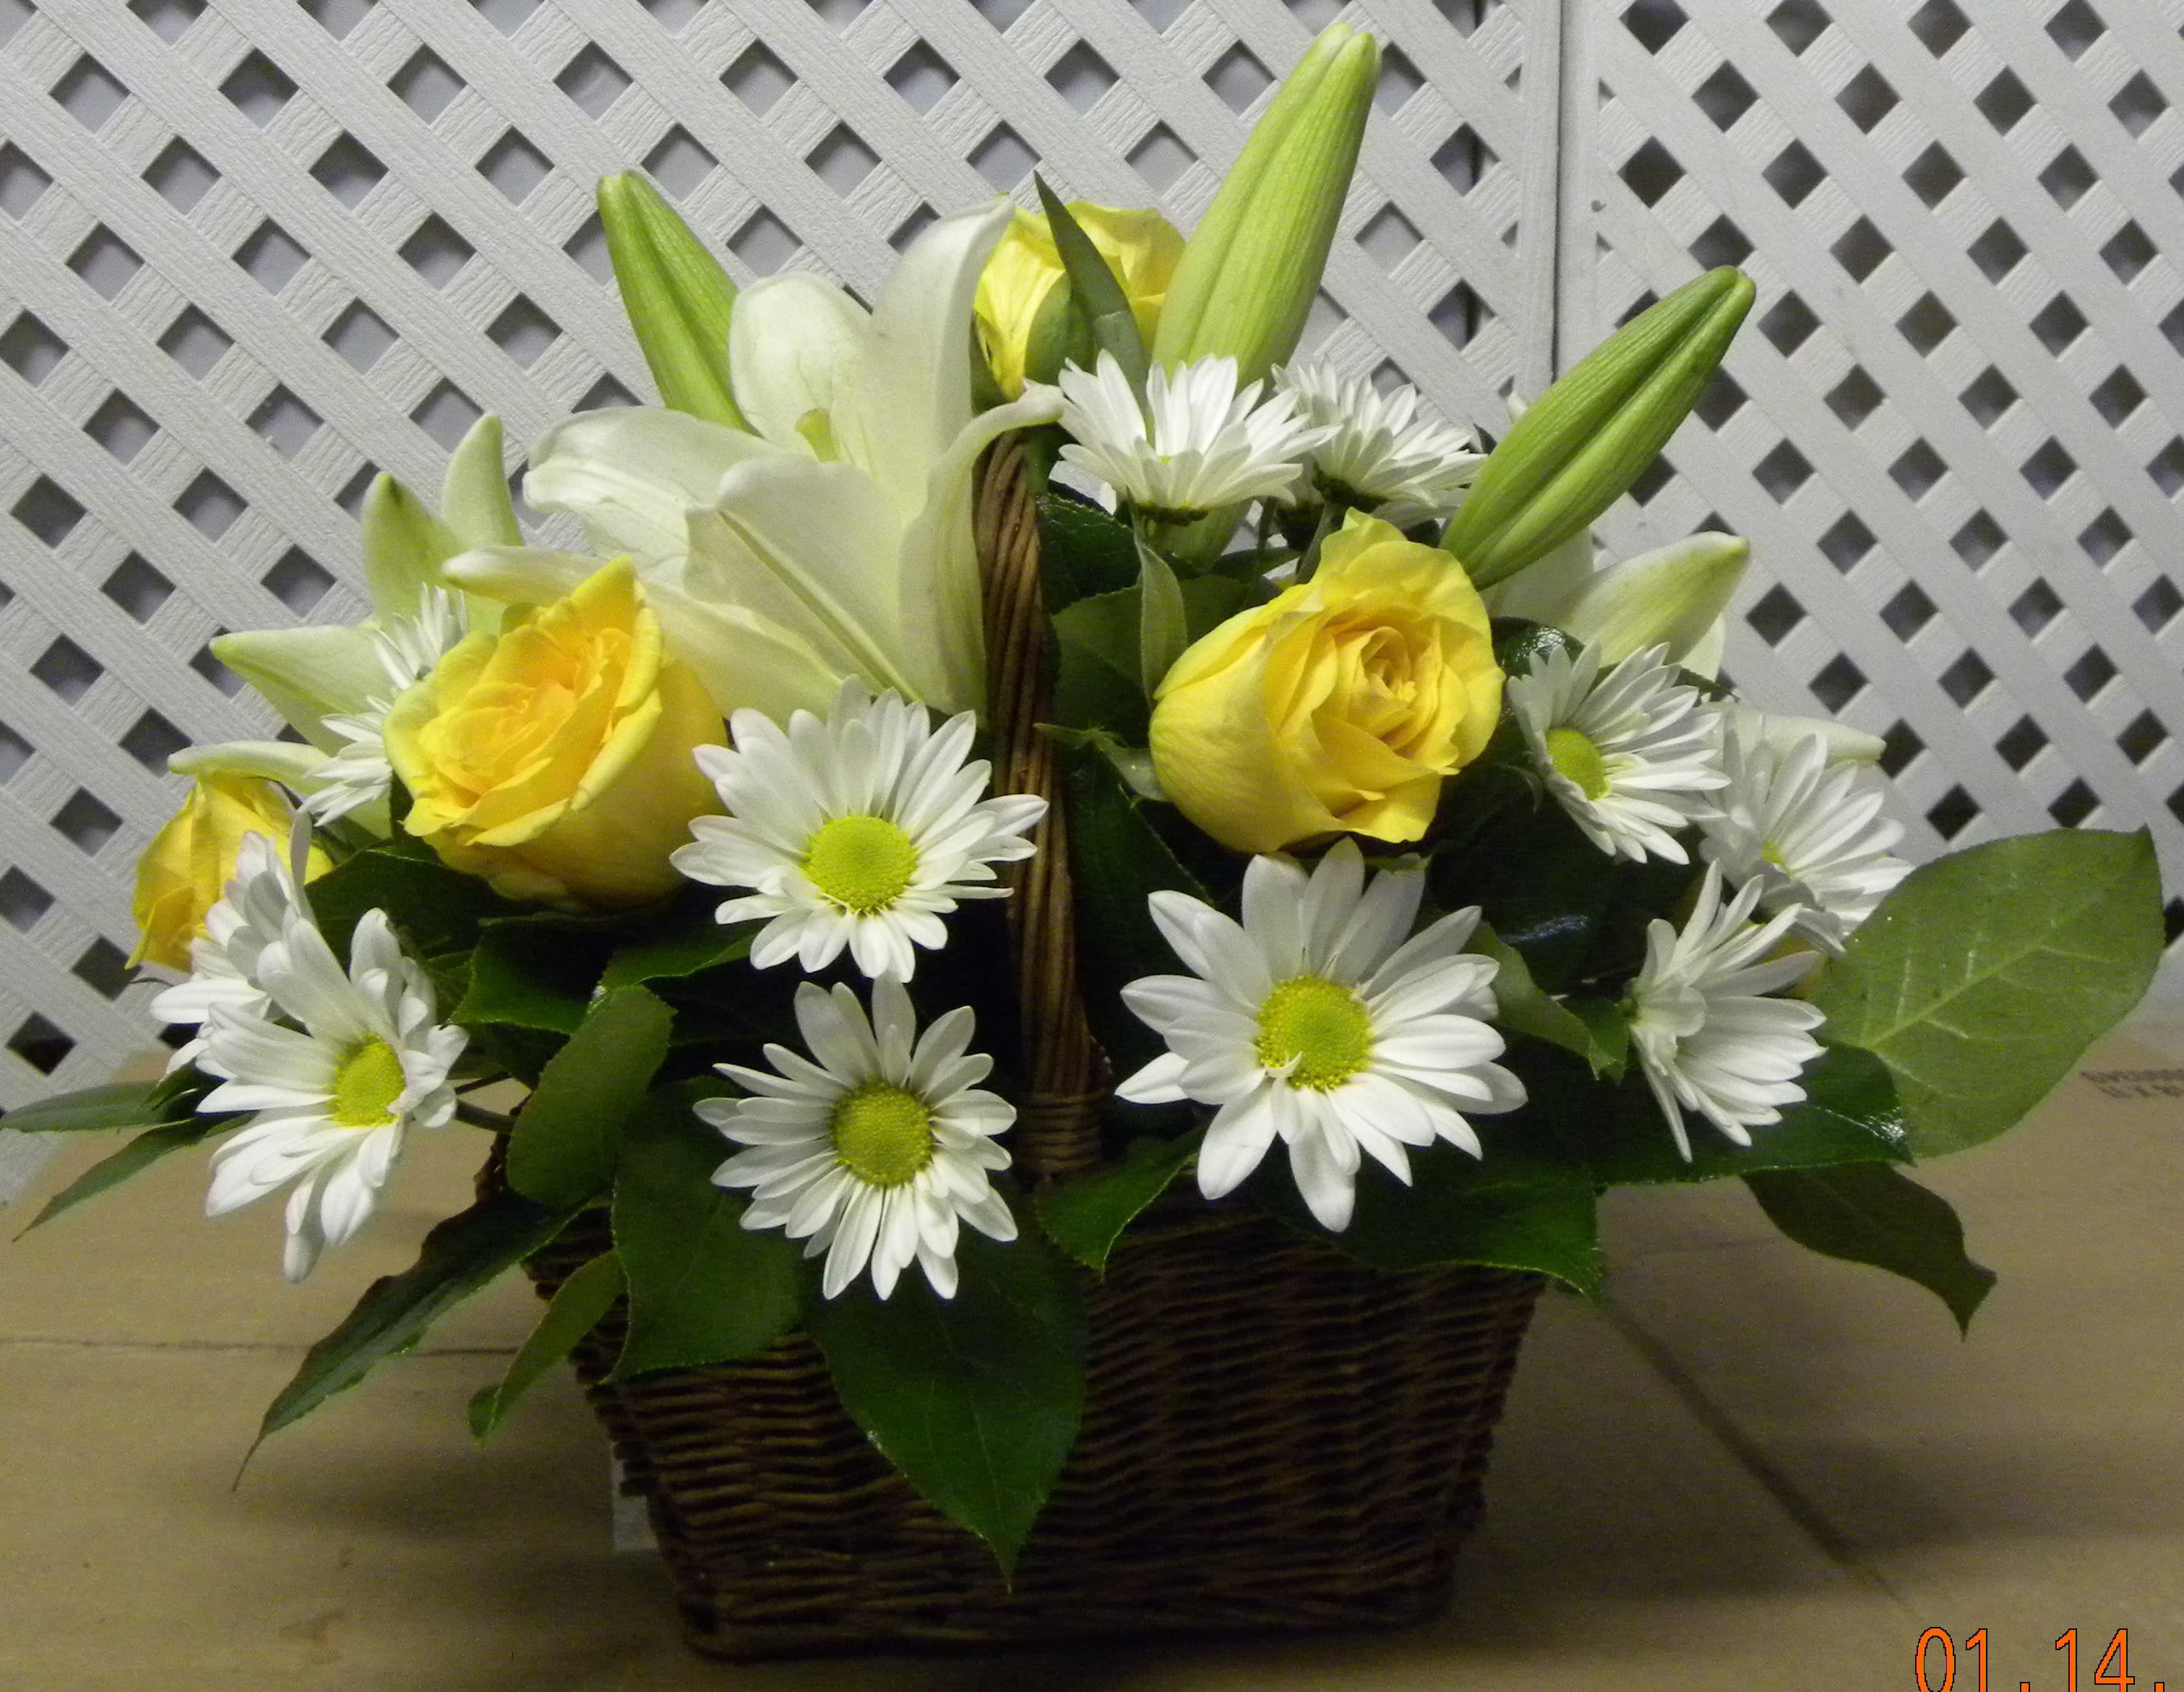 Brighten Your Day - White Daisies and Lilies, with yellows roses and greenery in designer basket 